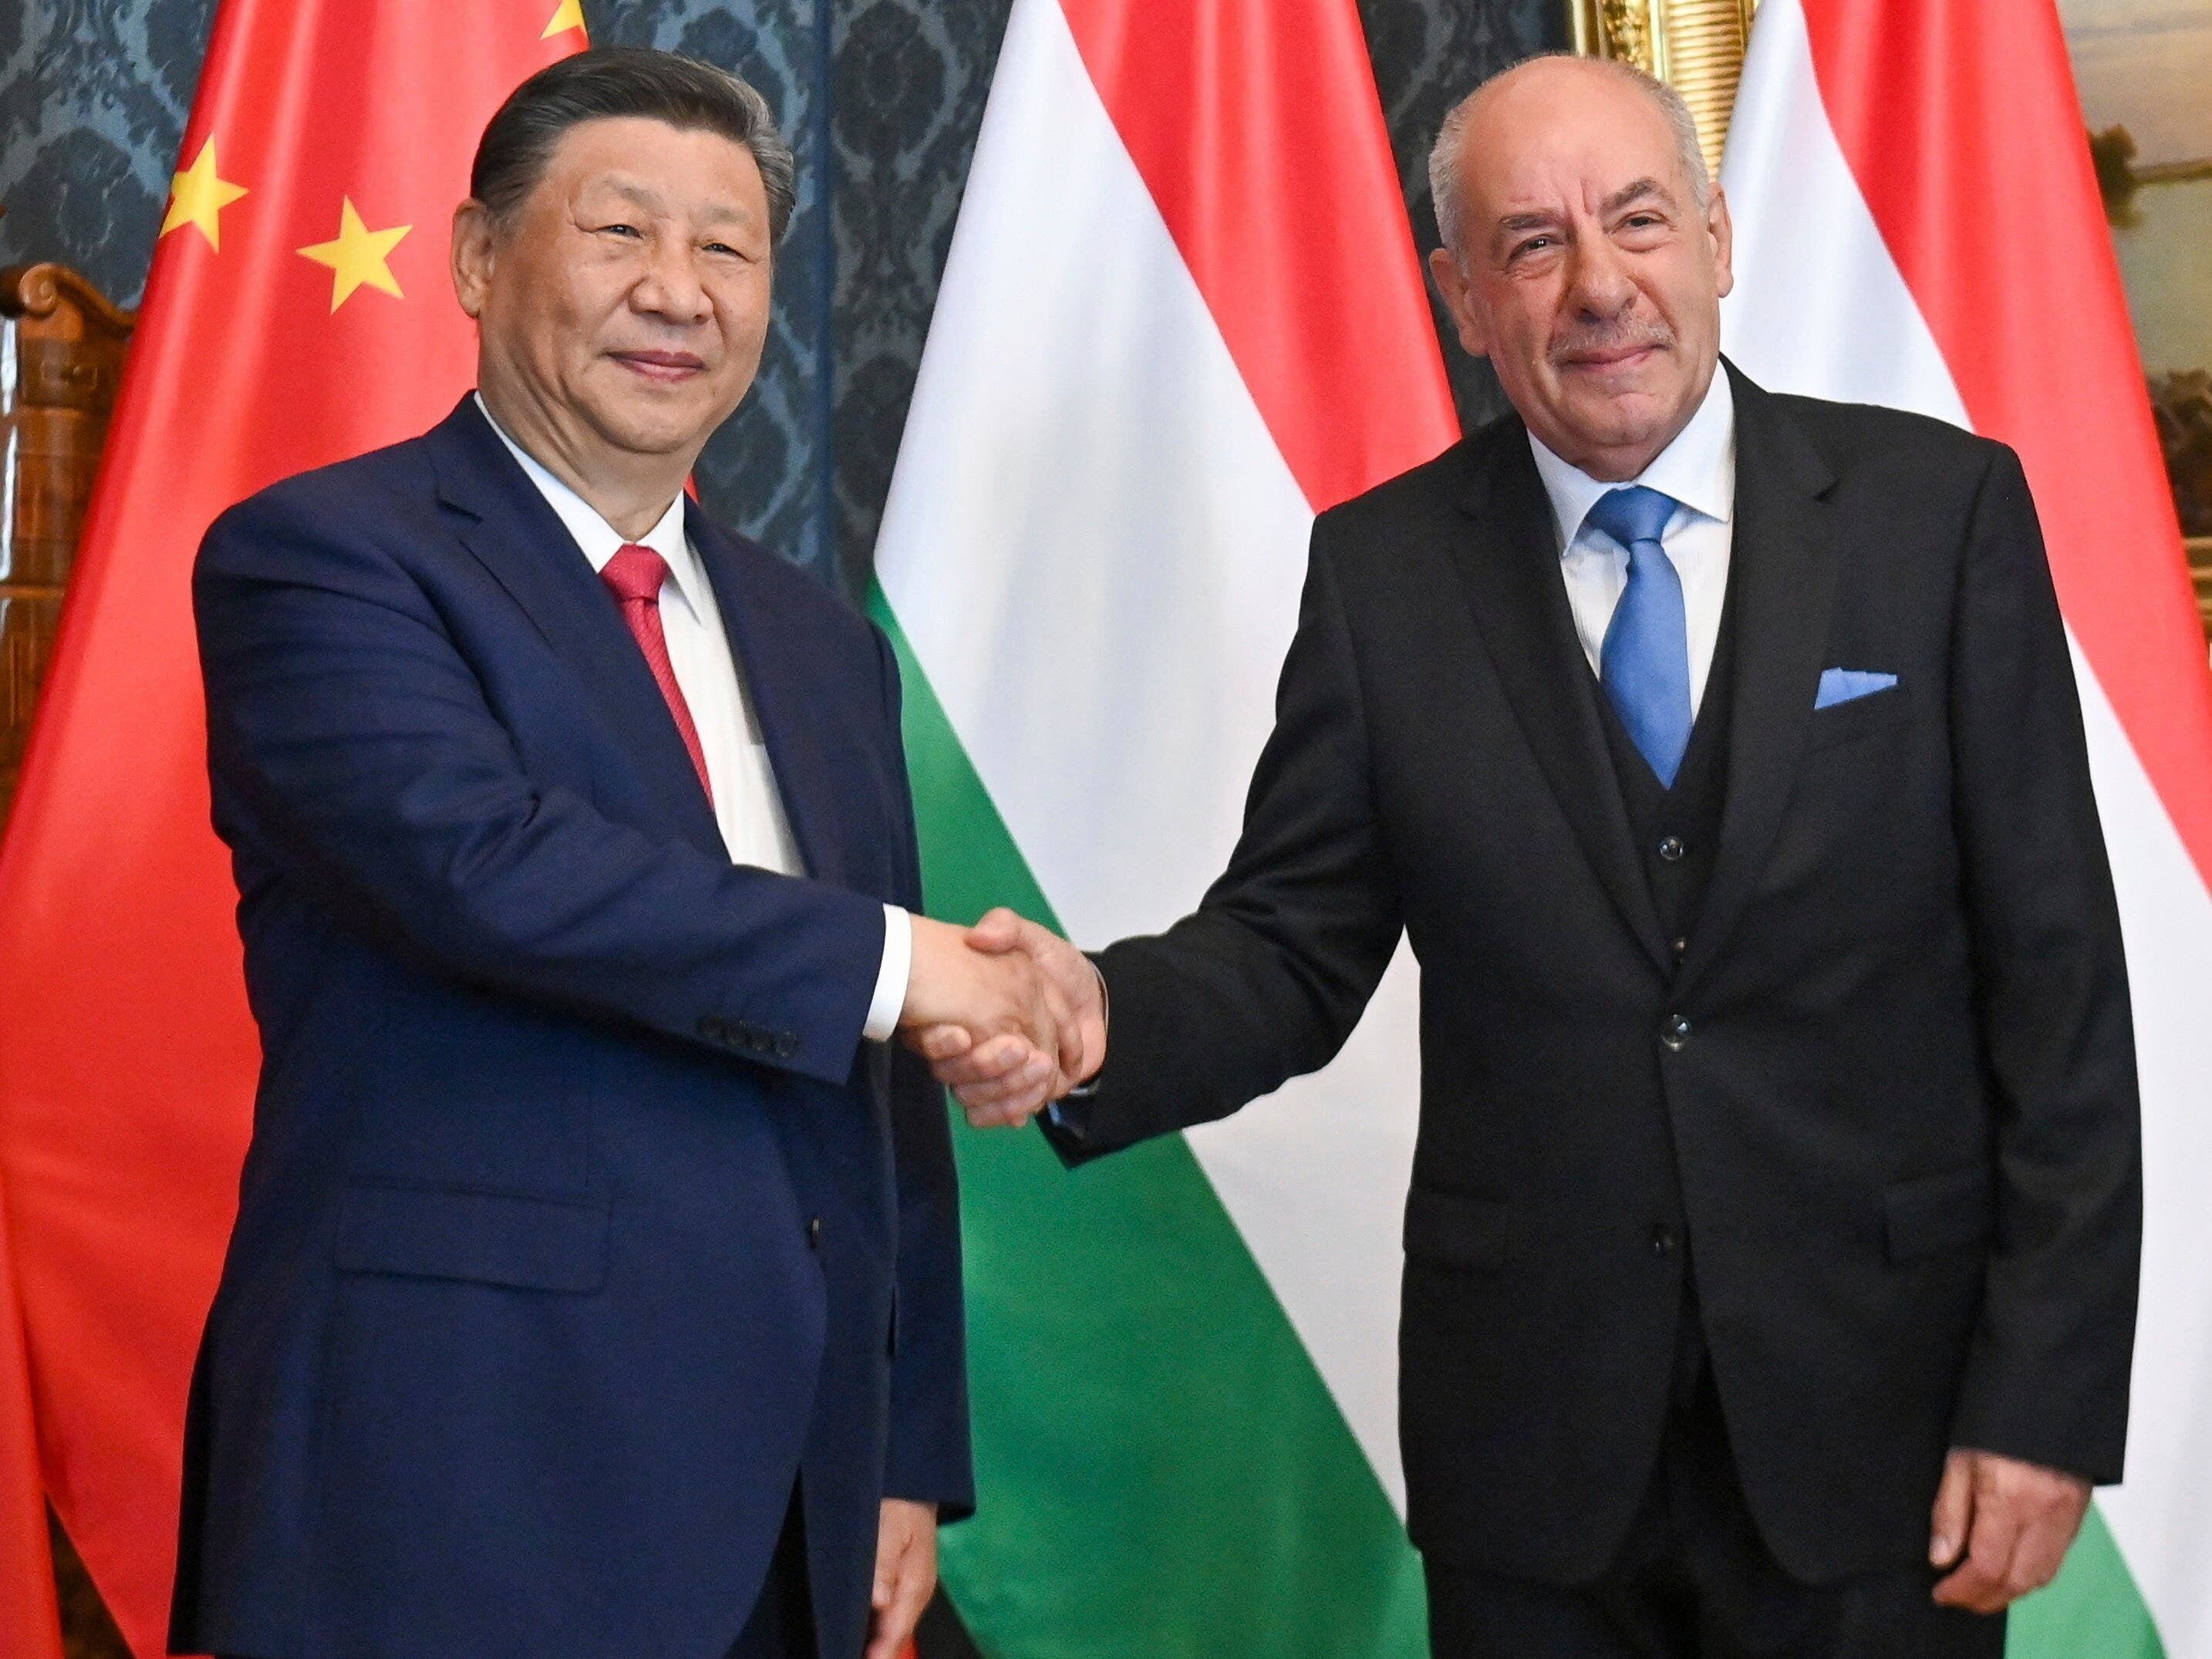 China’s Xi receives ceremonial welcome in Hungary ahead of talks with Orban